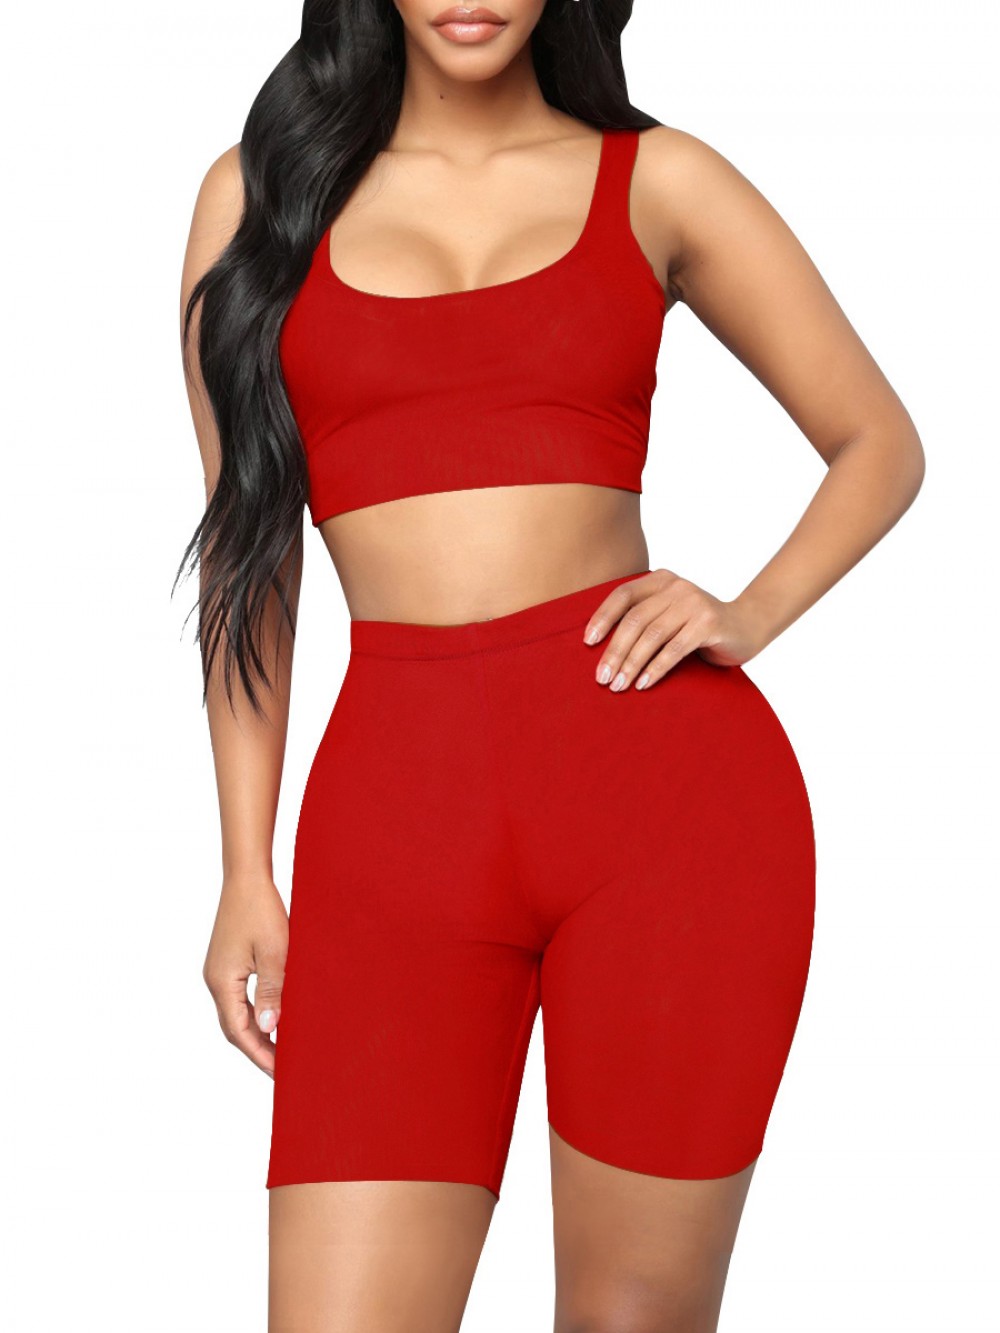 Breathable Red Sleeveless Top High Rise Sports Shorts Feminine